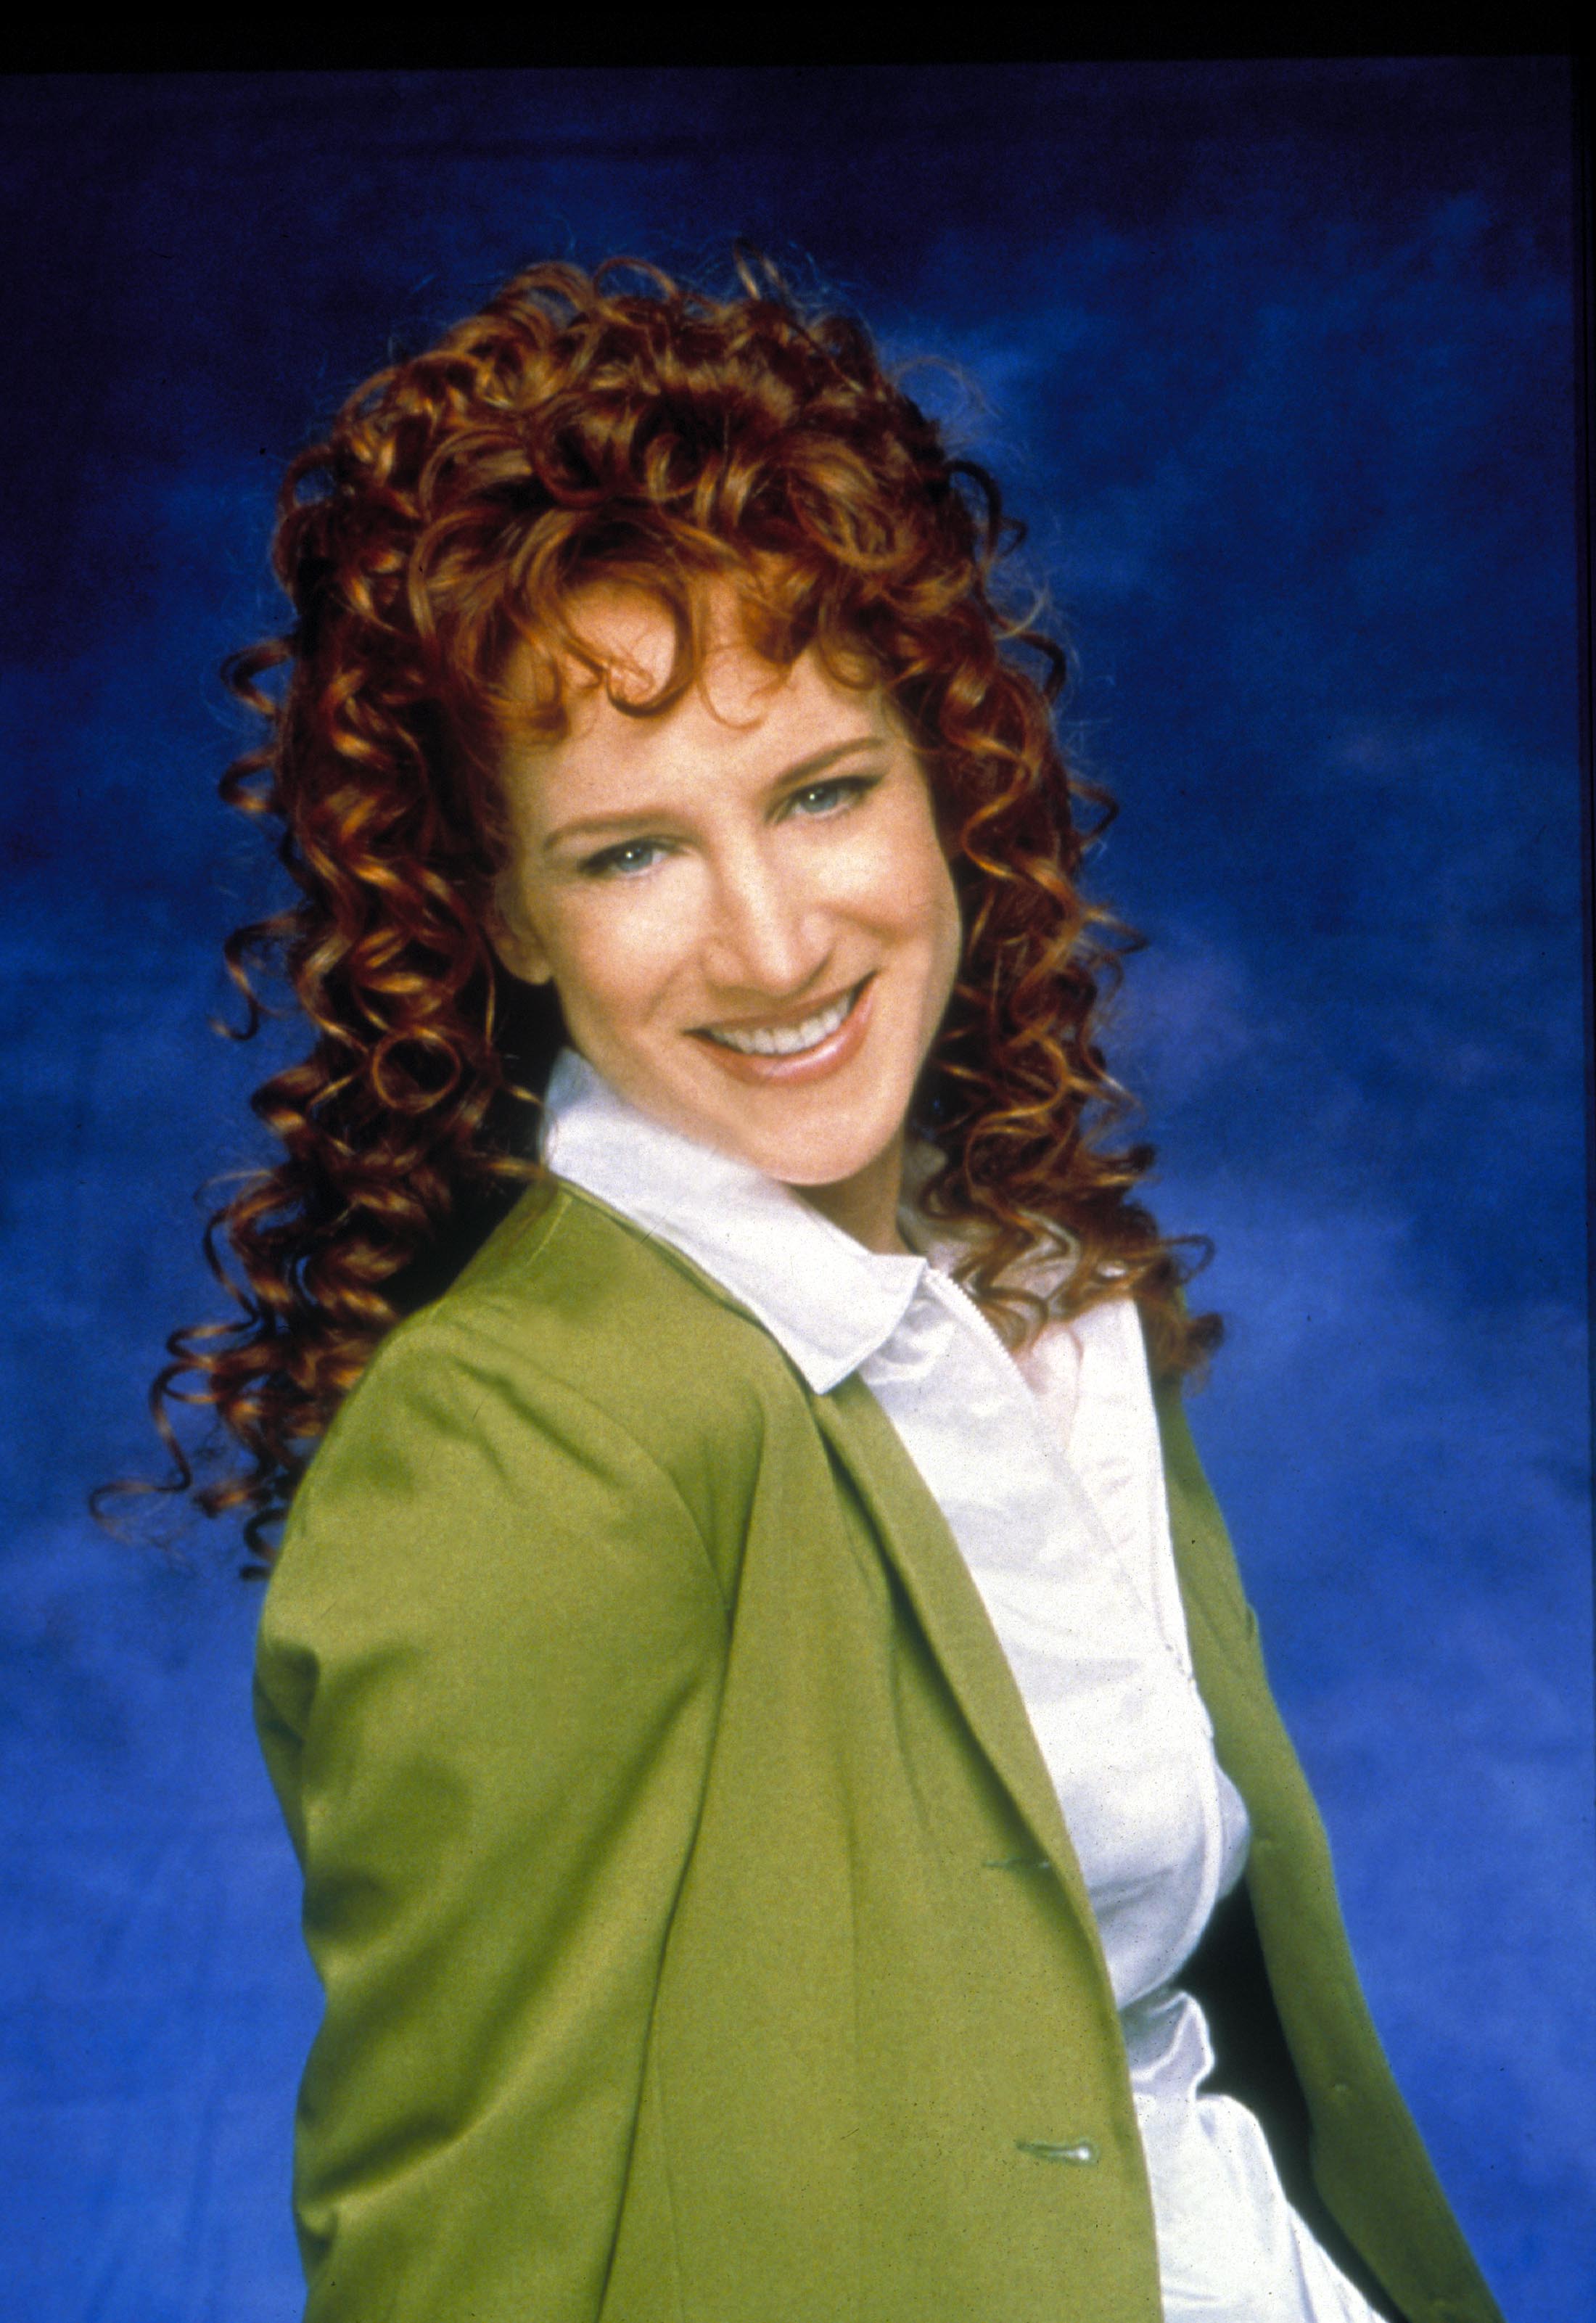 <p>Can you believe this plucky redhead is a young <a href="https://www.wonderwall.com/celebrity/profiles/overview/kathy-griffin-681.article">Kathy Griffin</a>? She's clearly had some work done since this promotional photo for NBC's "Suddenly Susan" was snapped in the late '90s.</p>